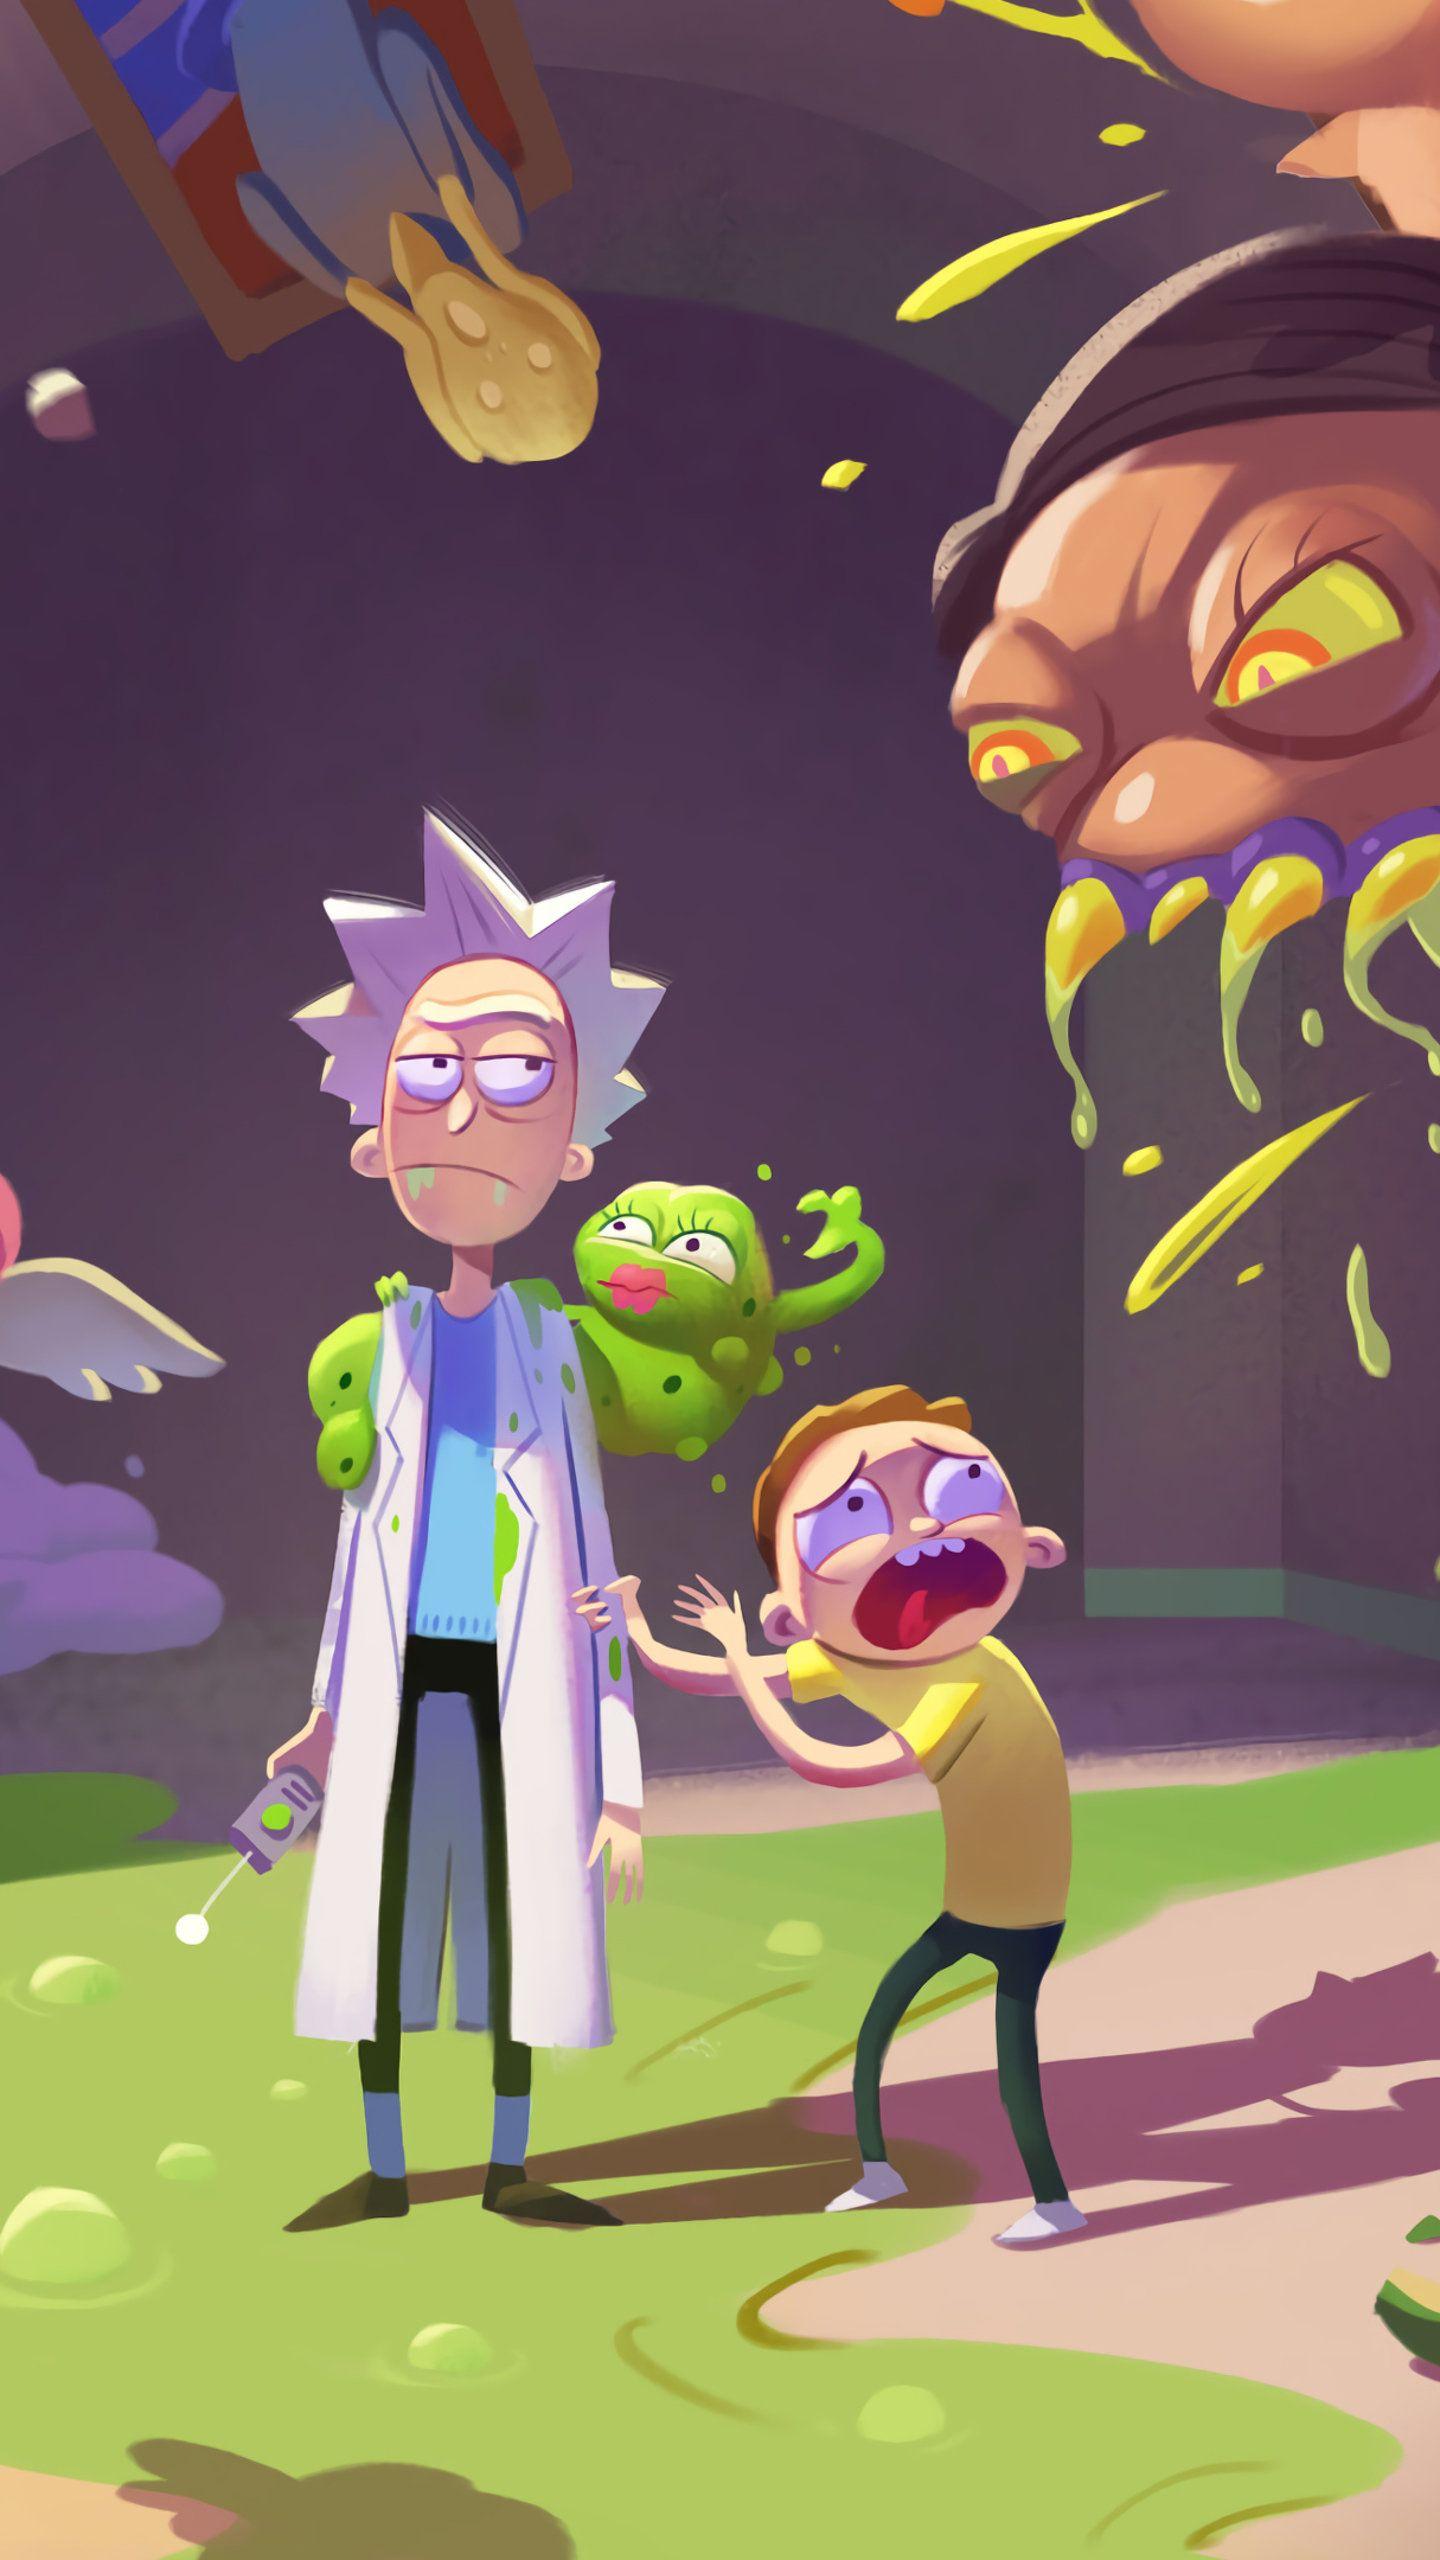 Rick and Morty Weed Wallpapers - Top Free Rick and Morty ...